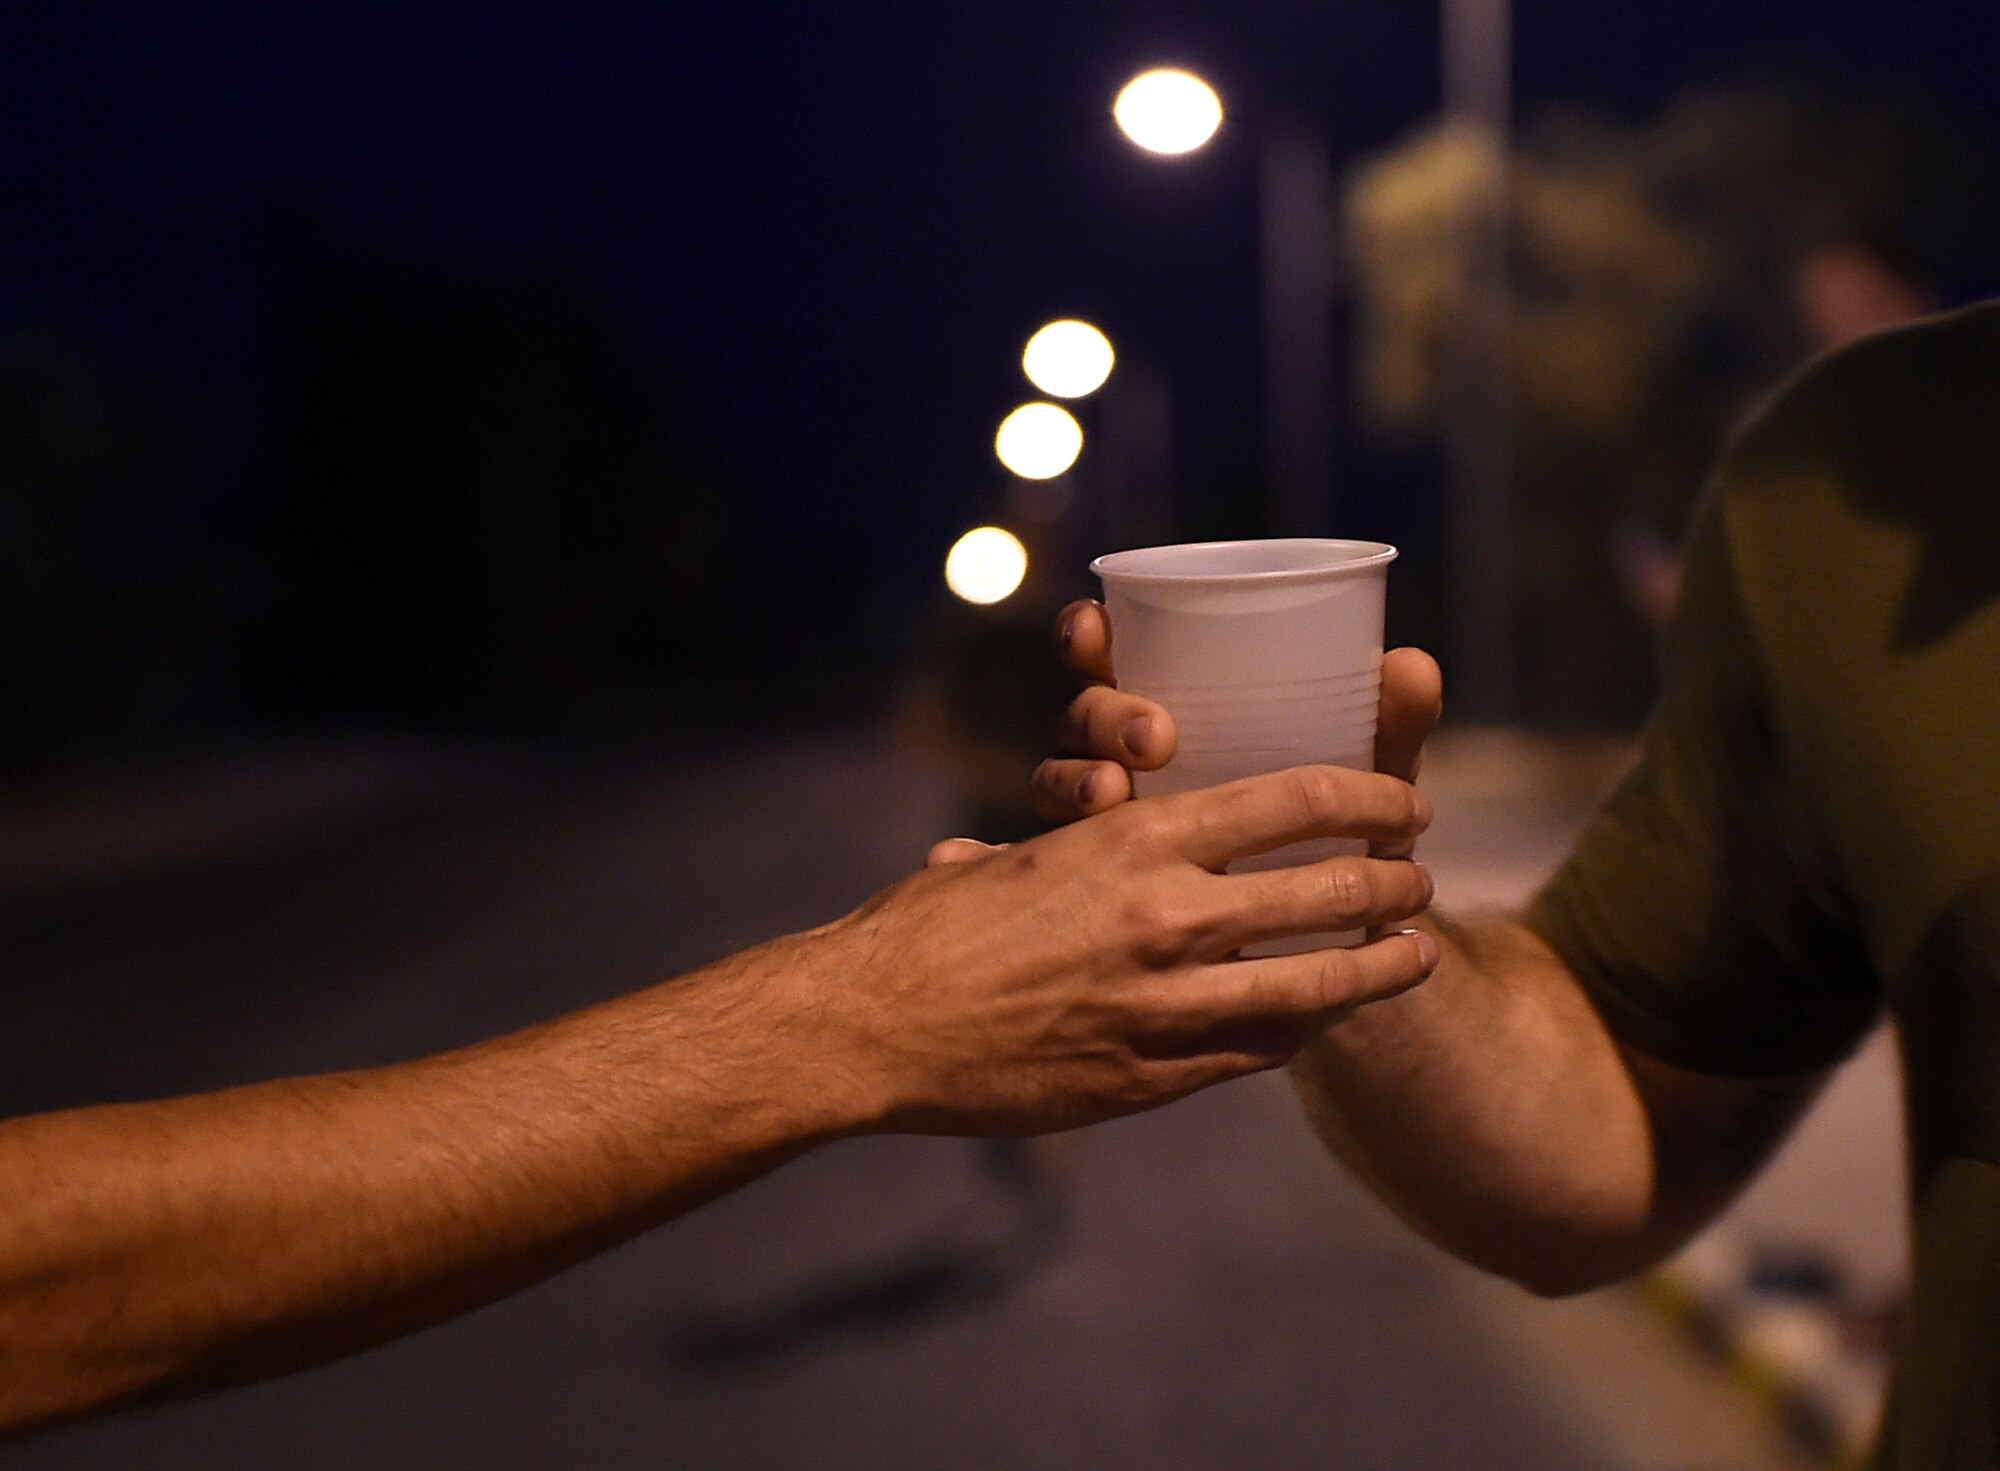 U.S. Air Force Staff Sgt. Kevin Carroll, left, hands a cup of water to Master Sgt. Mario Comella during the 40th Annual U.S. Marine Corps Marathon-Forward at an undisclosed location in Southwest Asia, Oct. 25, 2015. Runners and volunteers are currently deployed in support of Operation Inherent Resolve, which aims to degrade and defeat Daesh. (U.S. Air Force photo by Staff Sgt. Jerilyn Quintanilla/Released)   